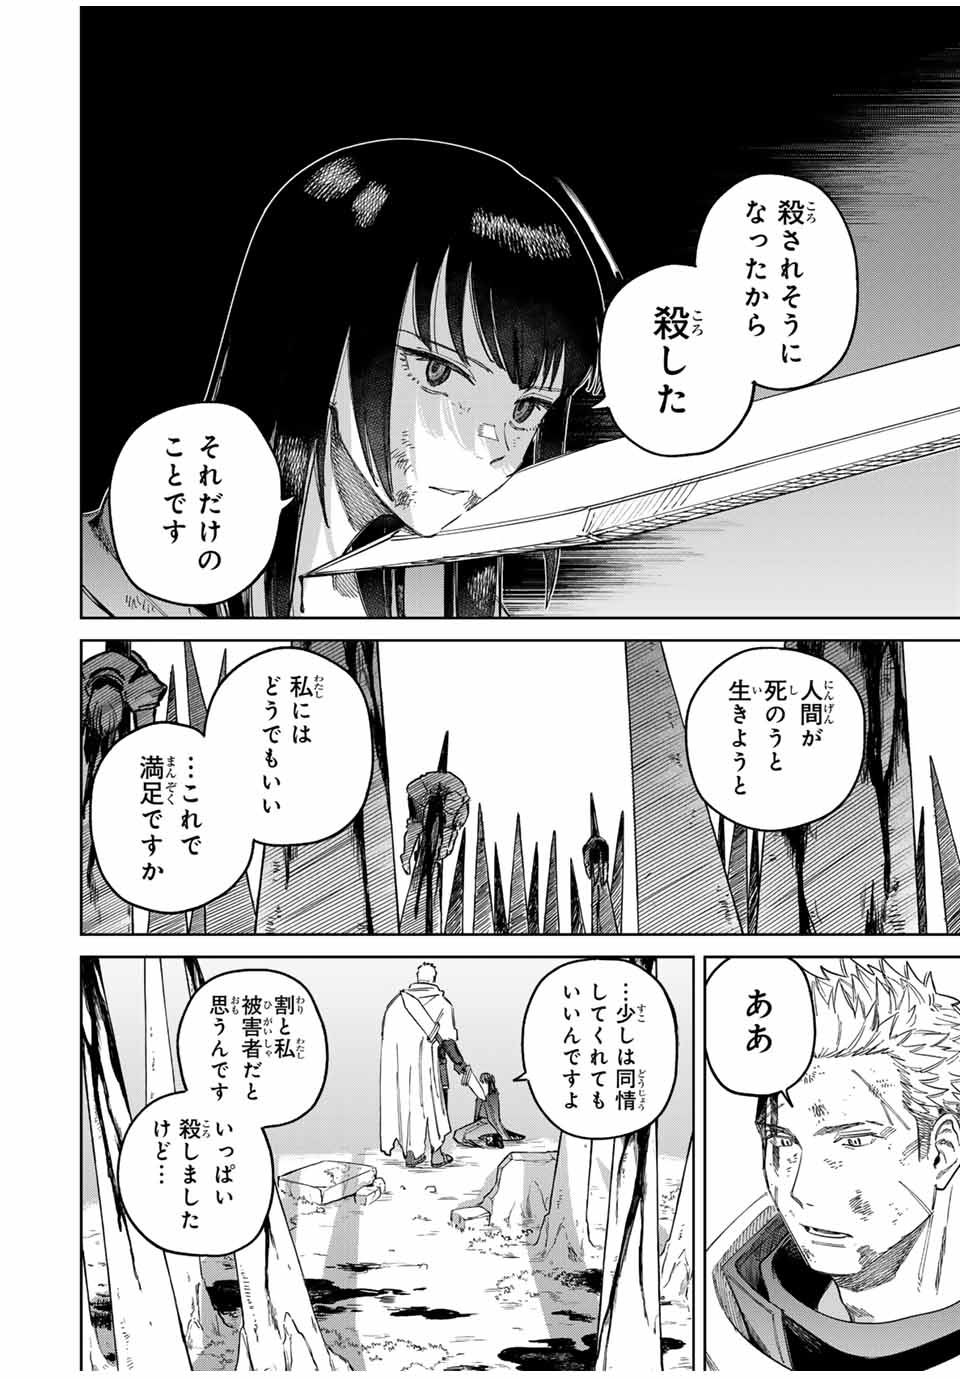 Witch and Mercenary 魔女と傭兵 第1.2話 - Page 22